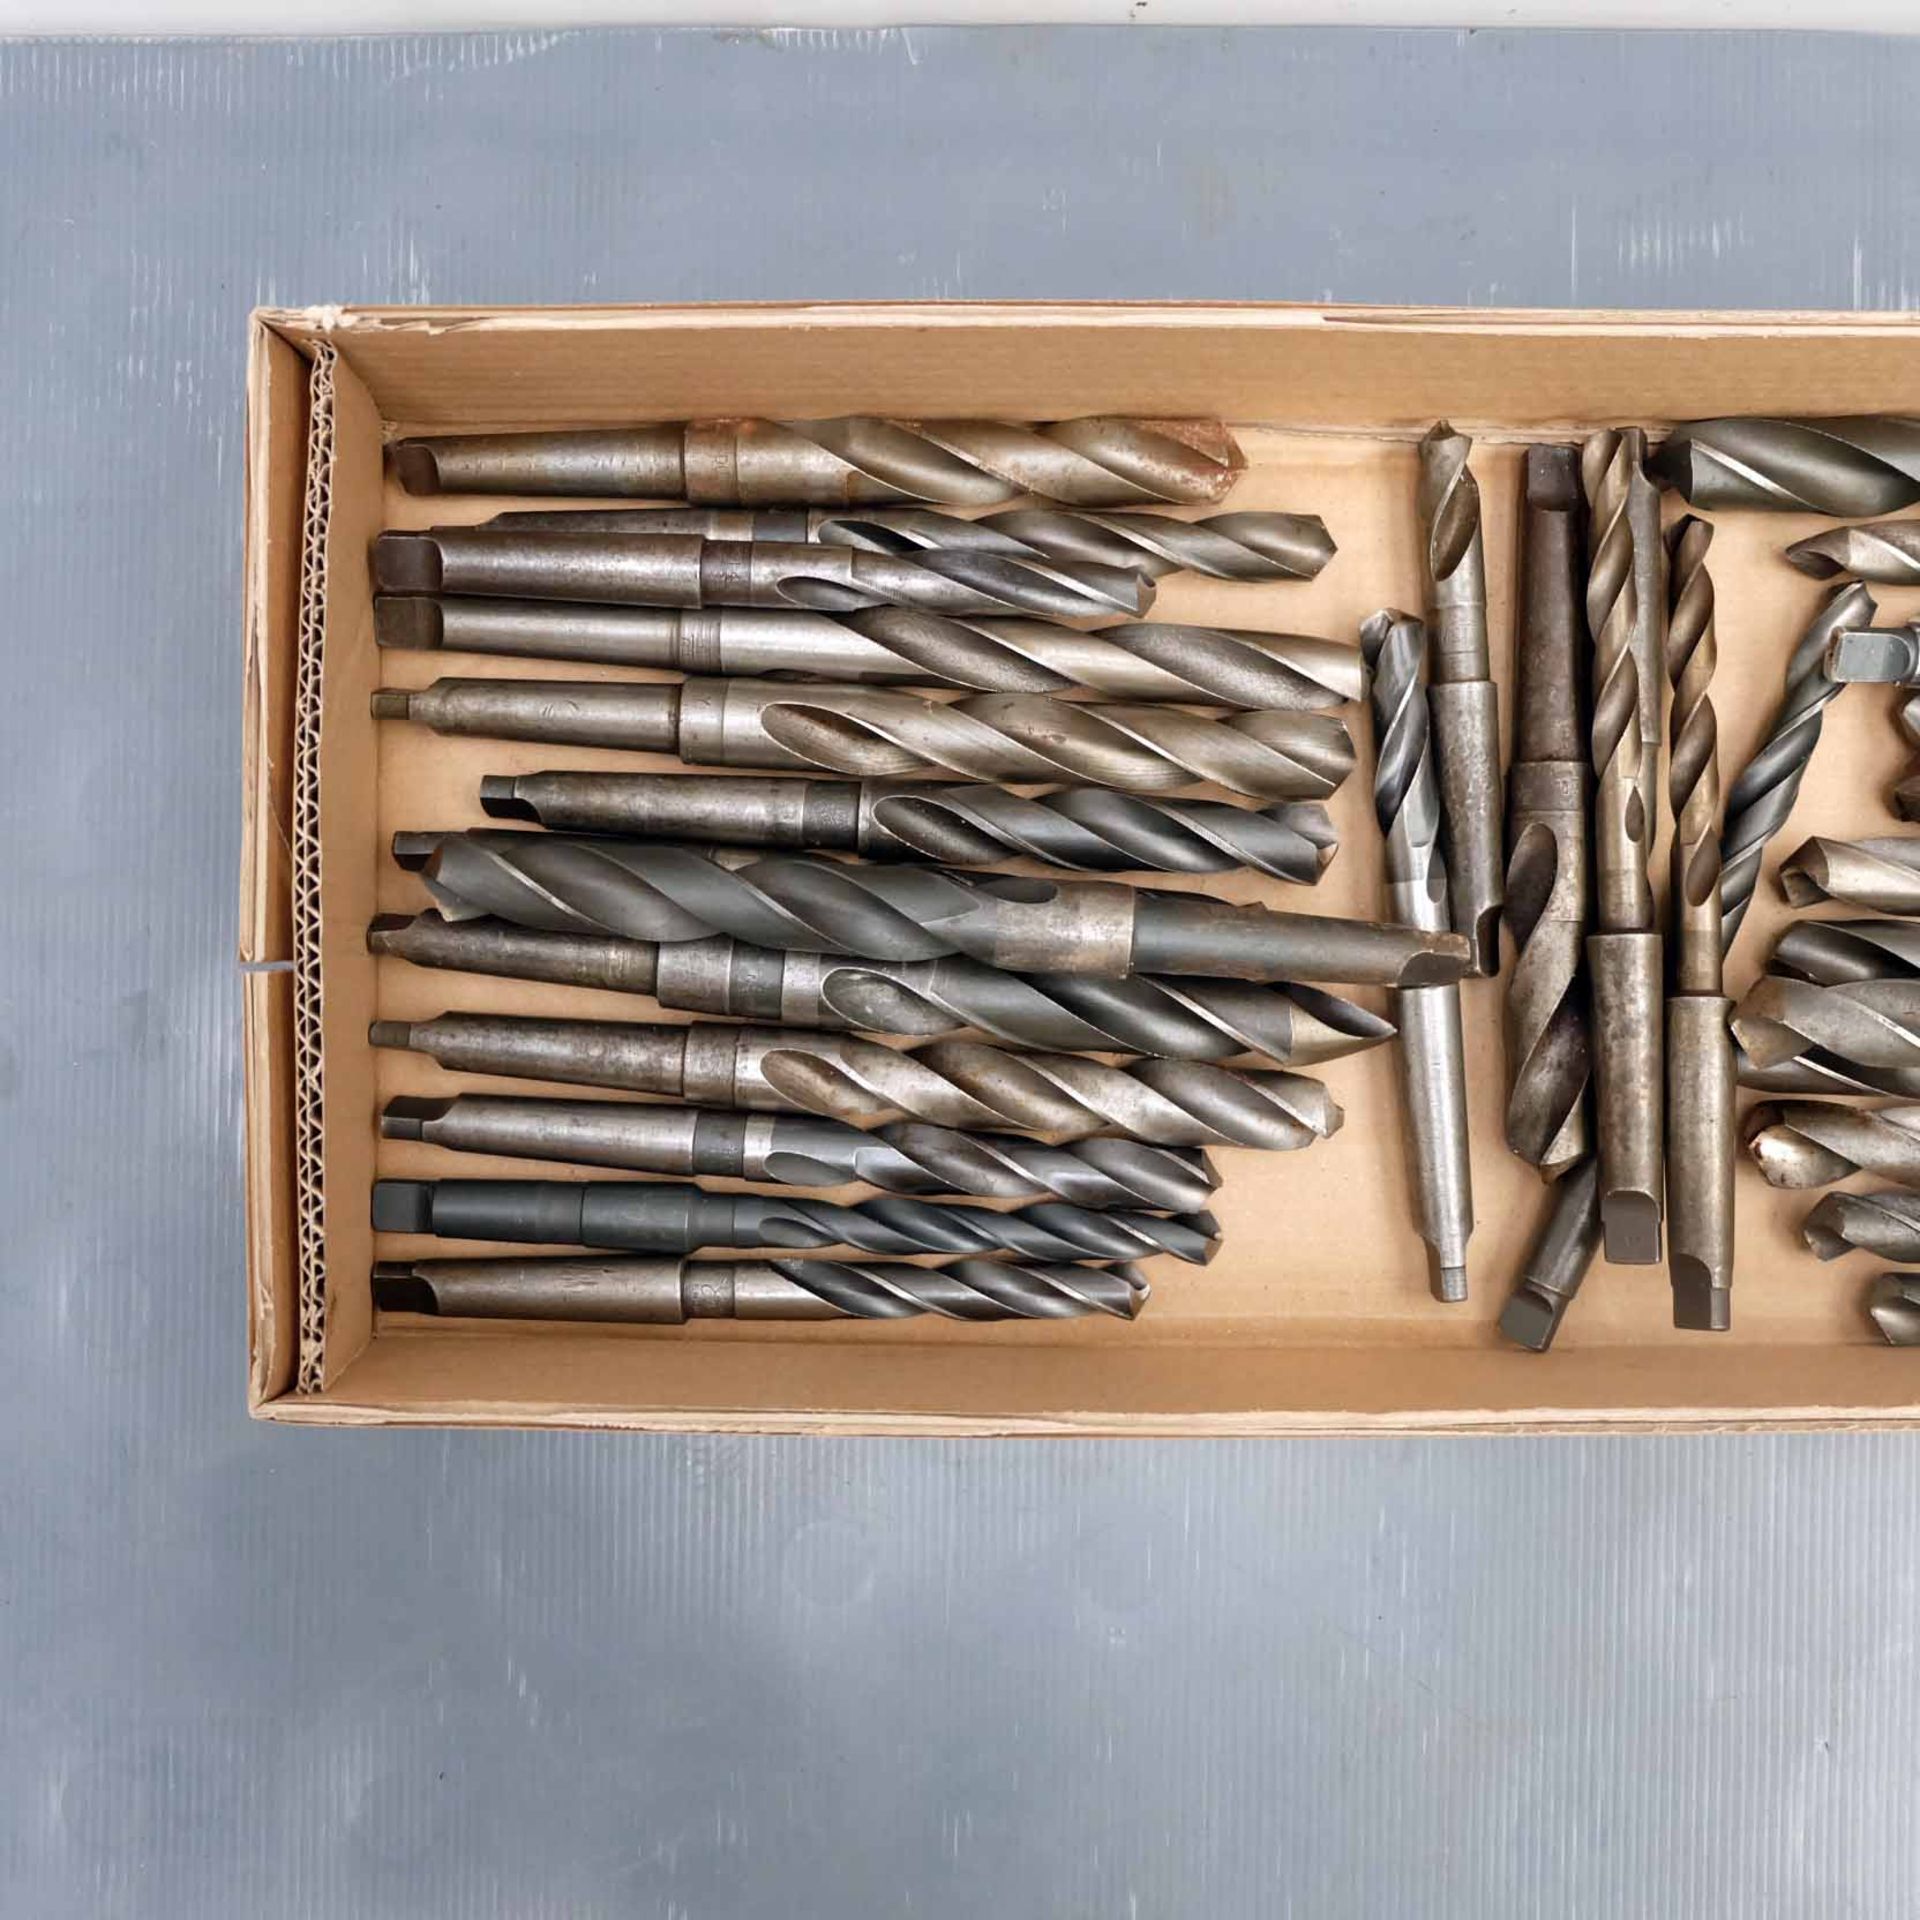 Quantity of 2 Morse Taper Twist Drills. Various Imperial Sizes. - Image 2 of 3